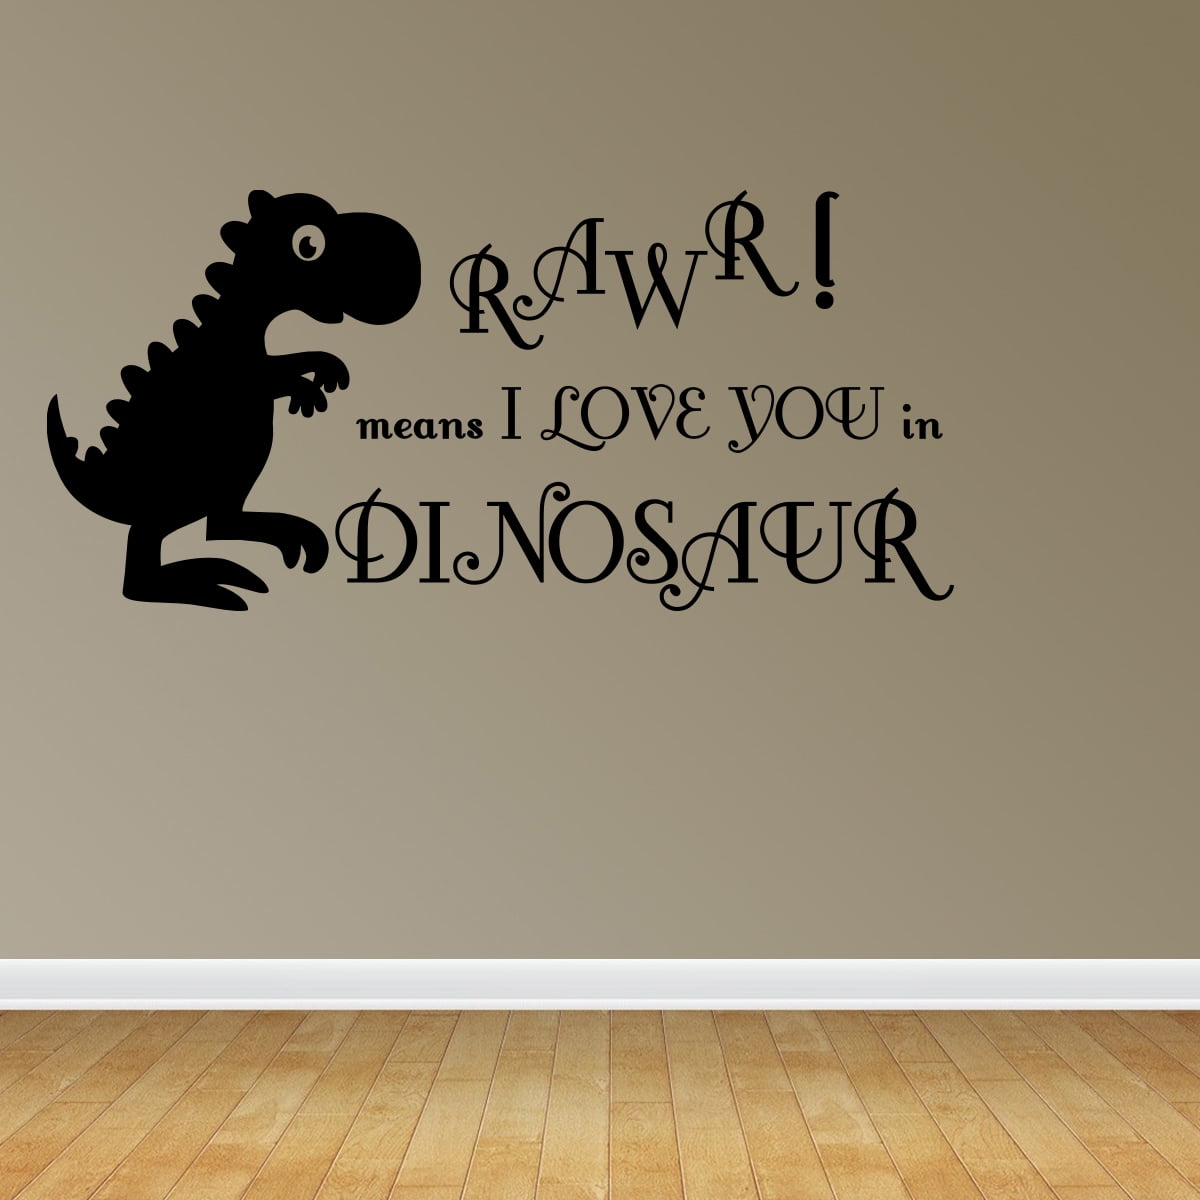 Wall Stickers Vinyl Wall Decals Dinosaur Wall Decal Signage Wall Decor Wall Decal Roar Means I Love You In Dinosaur Wall Quotes